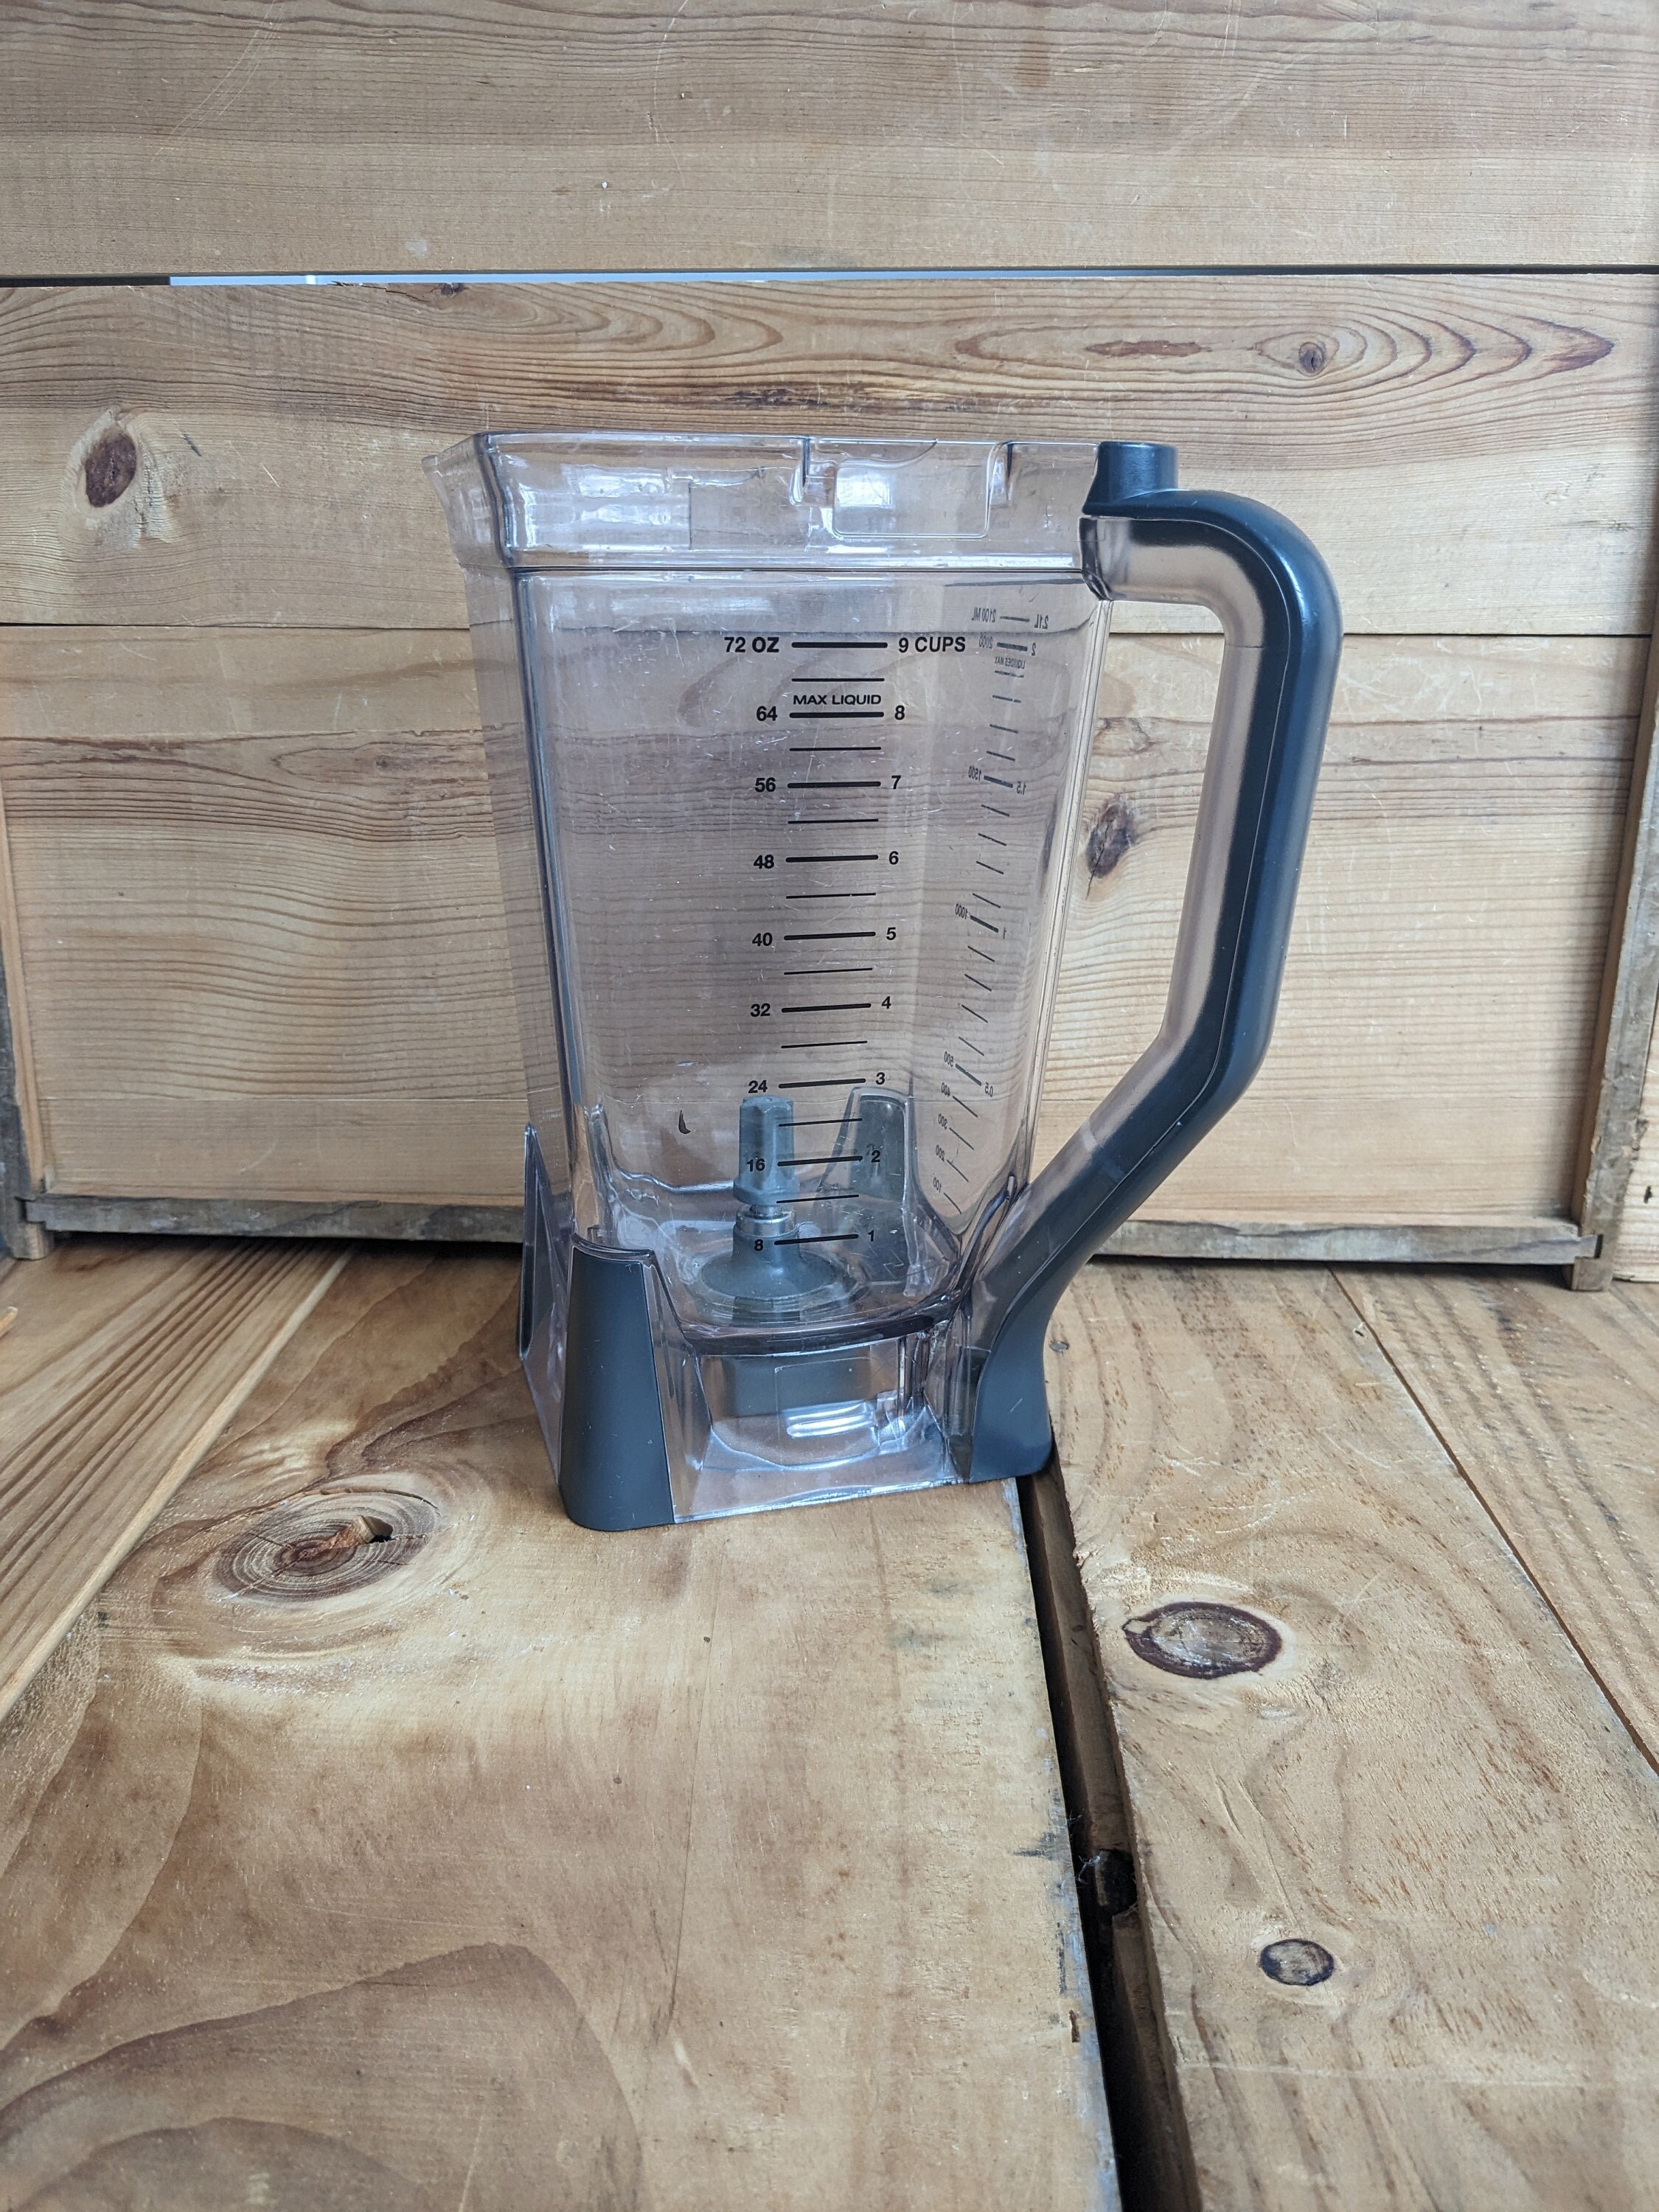 Alterna Jar 80 Ounces Fits on Blendtec Blenders With Replaceable Blade  Assembly 